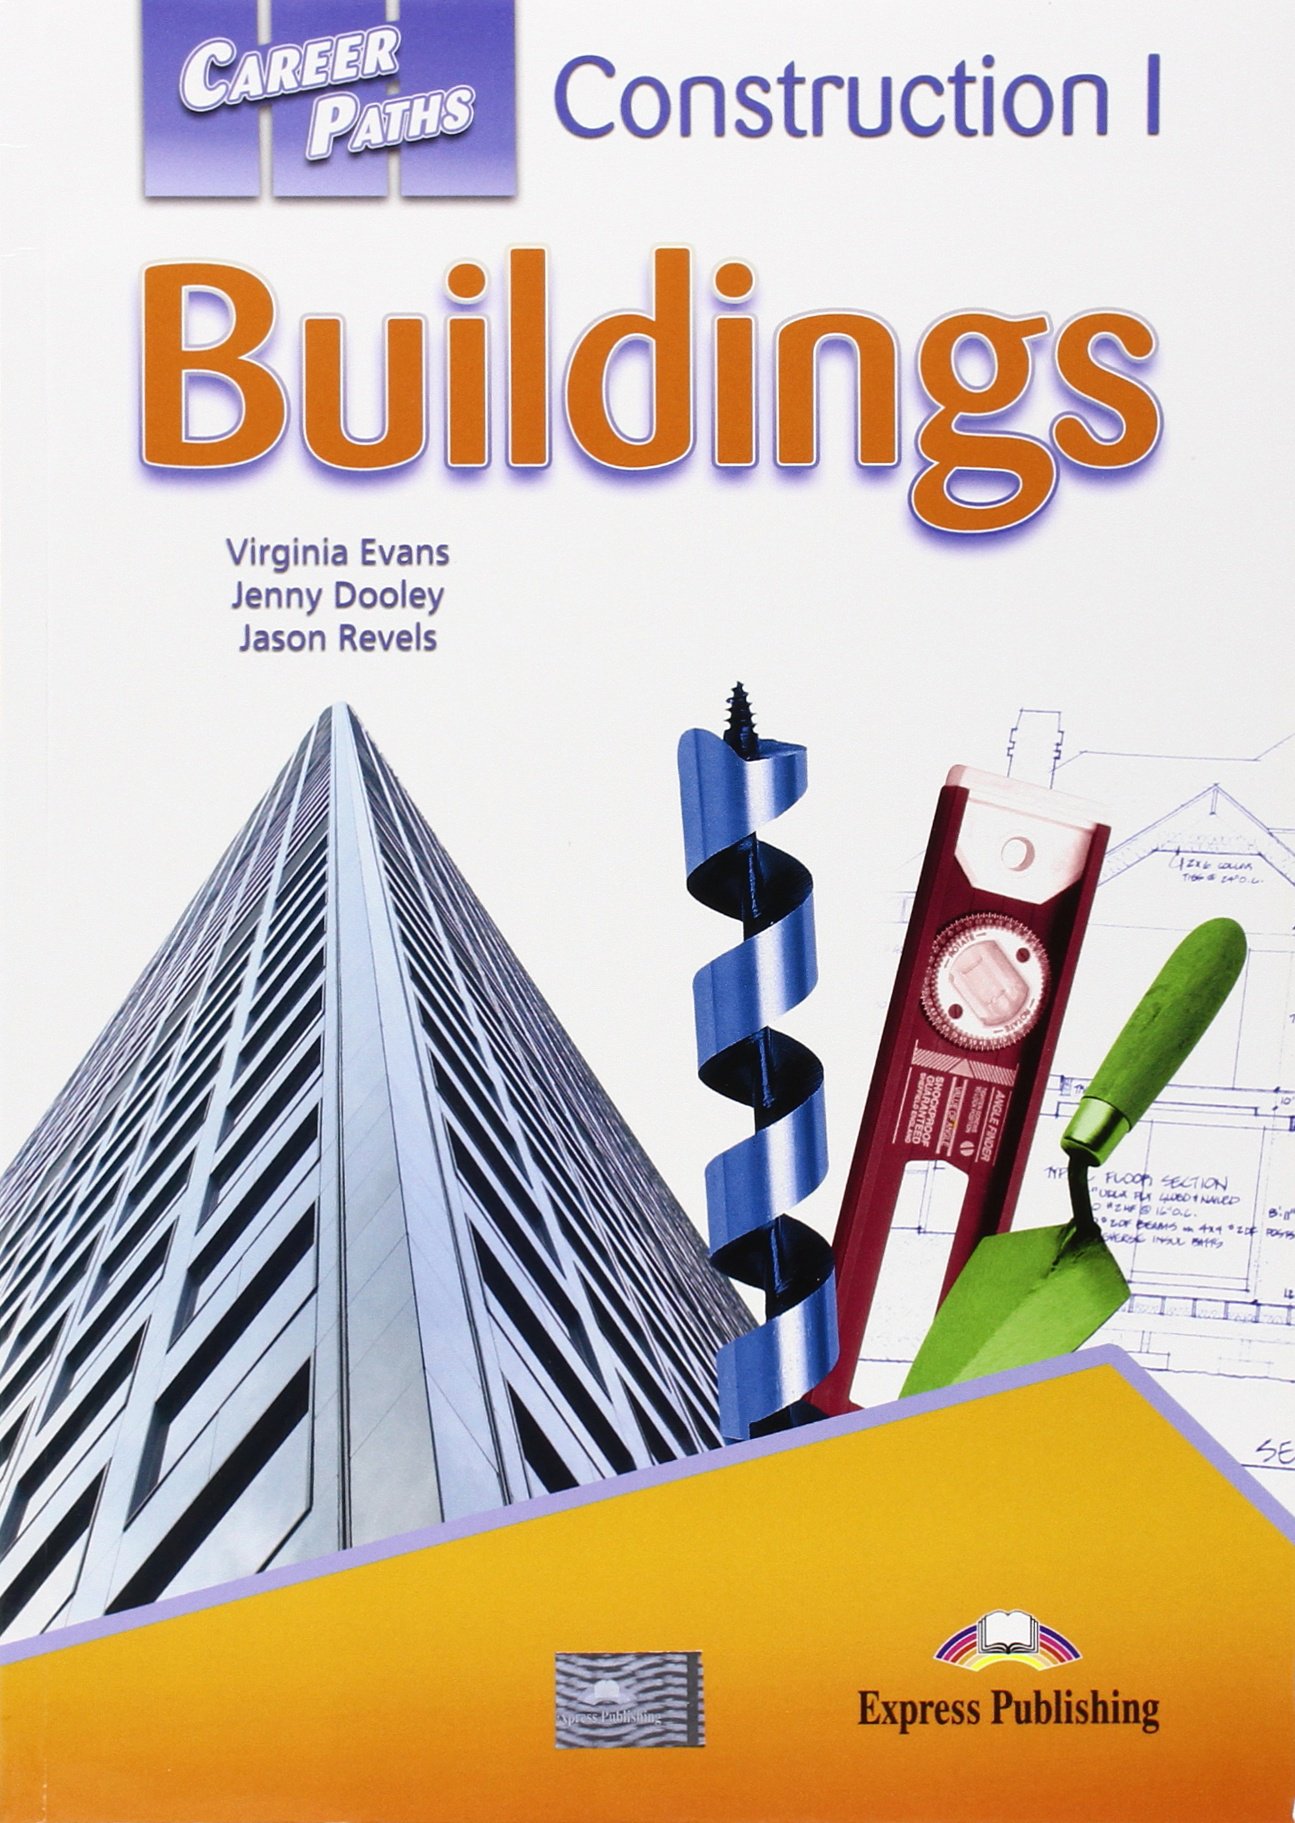 CONSTRUCTION 1 - BUILINGS (CAREER PATHS) Student's Book